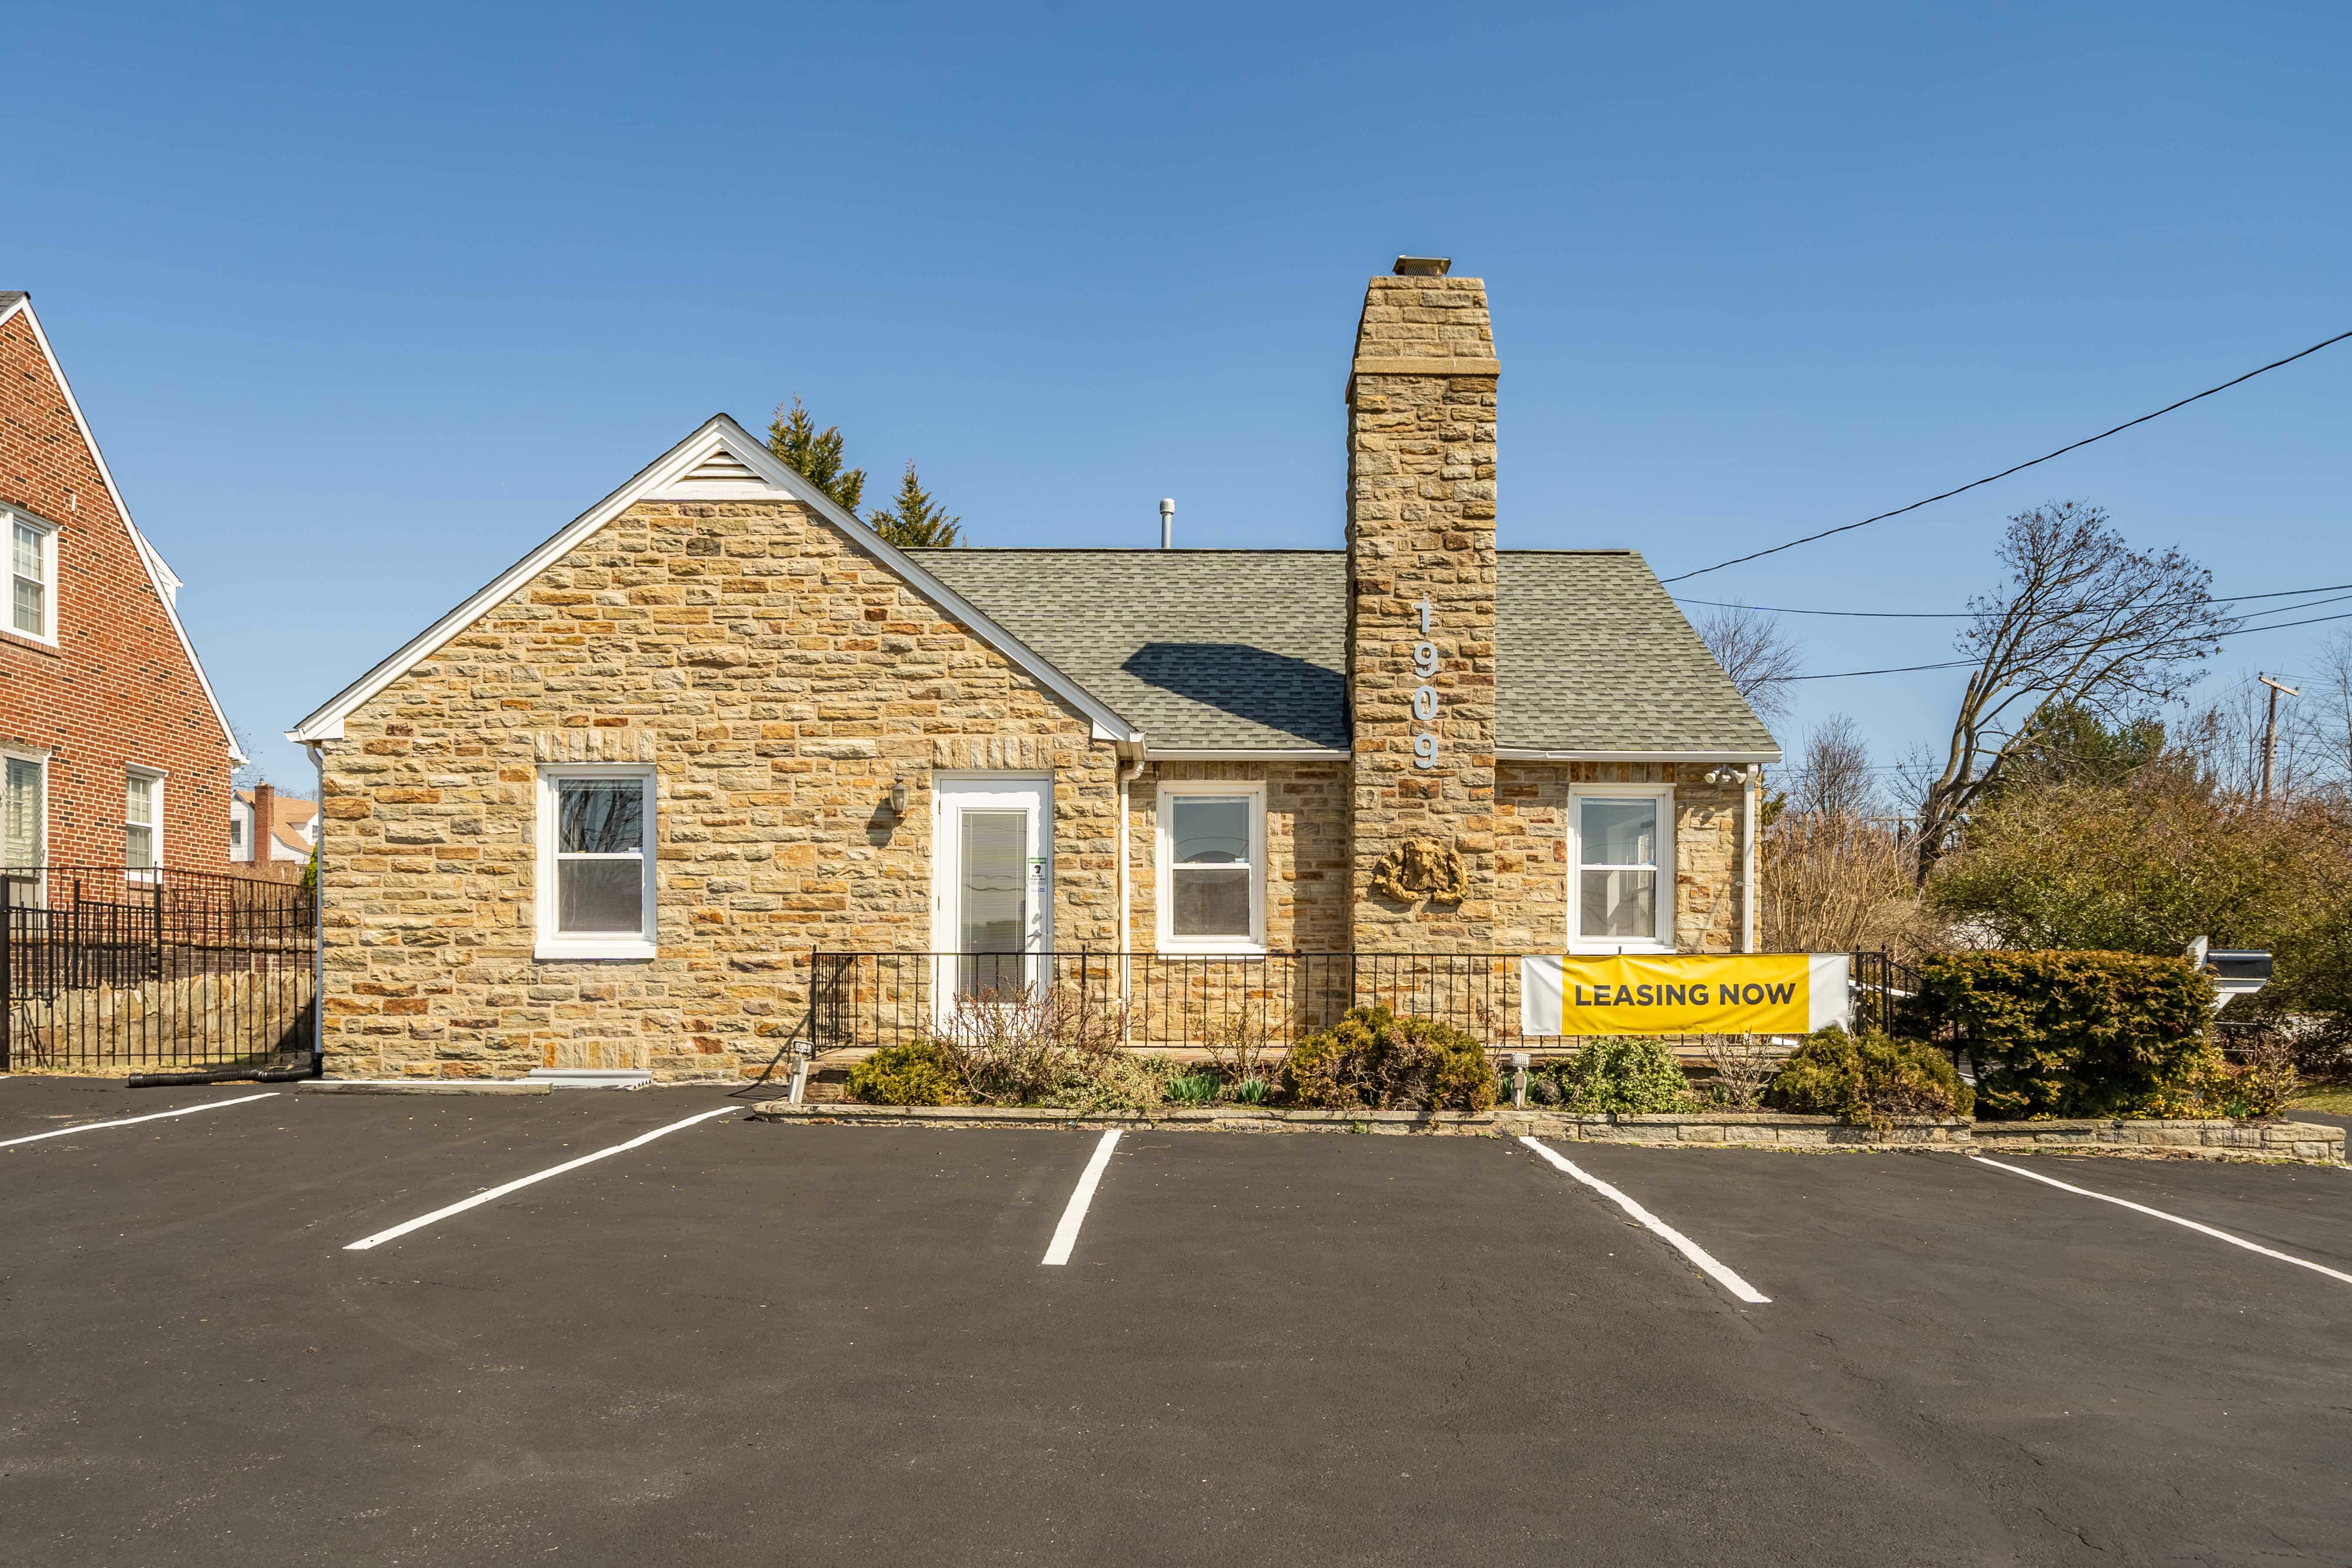 1909 York Road, Lutherville-Timonium, Maryland 21093, ,3 BathroomsBathrooms,Commercial Lease,Active,York,1010015773